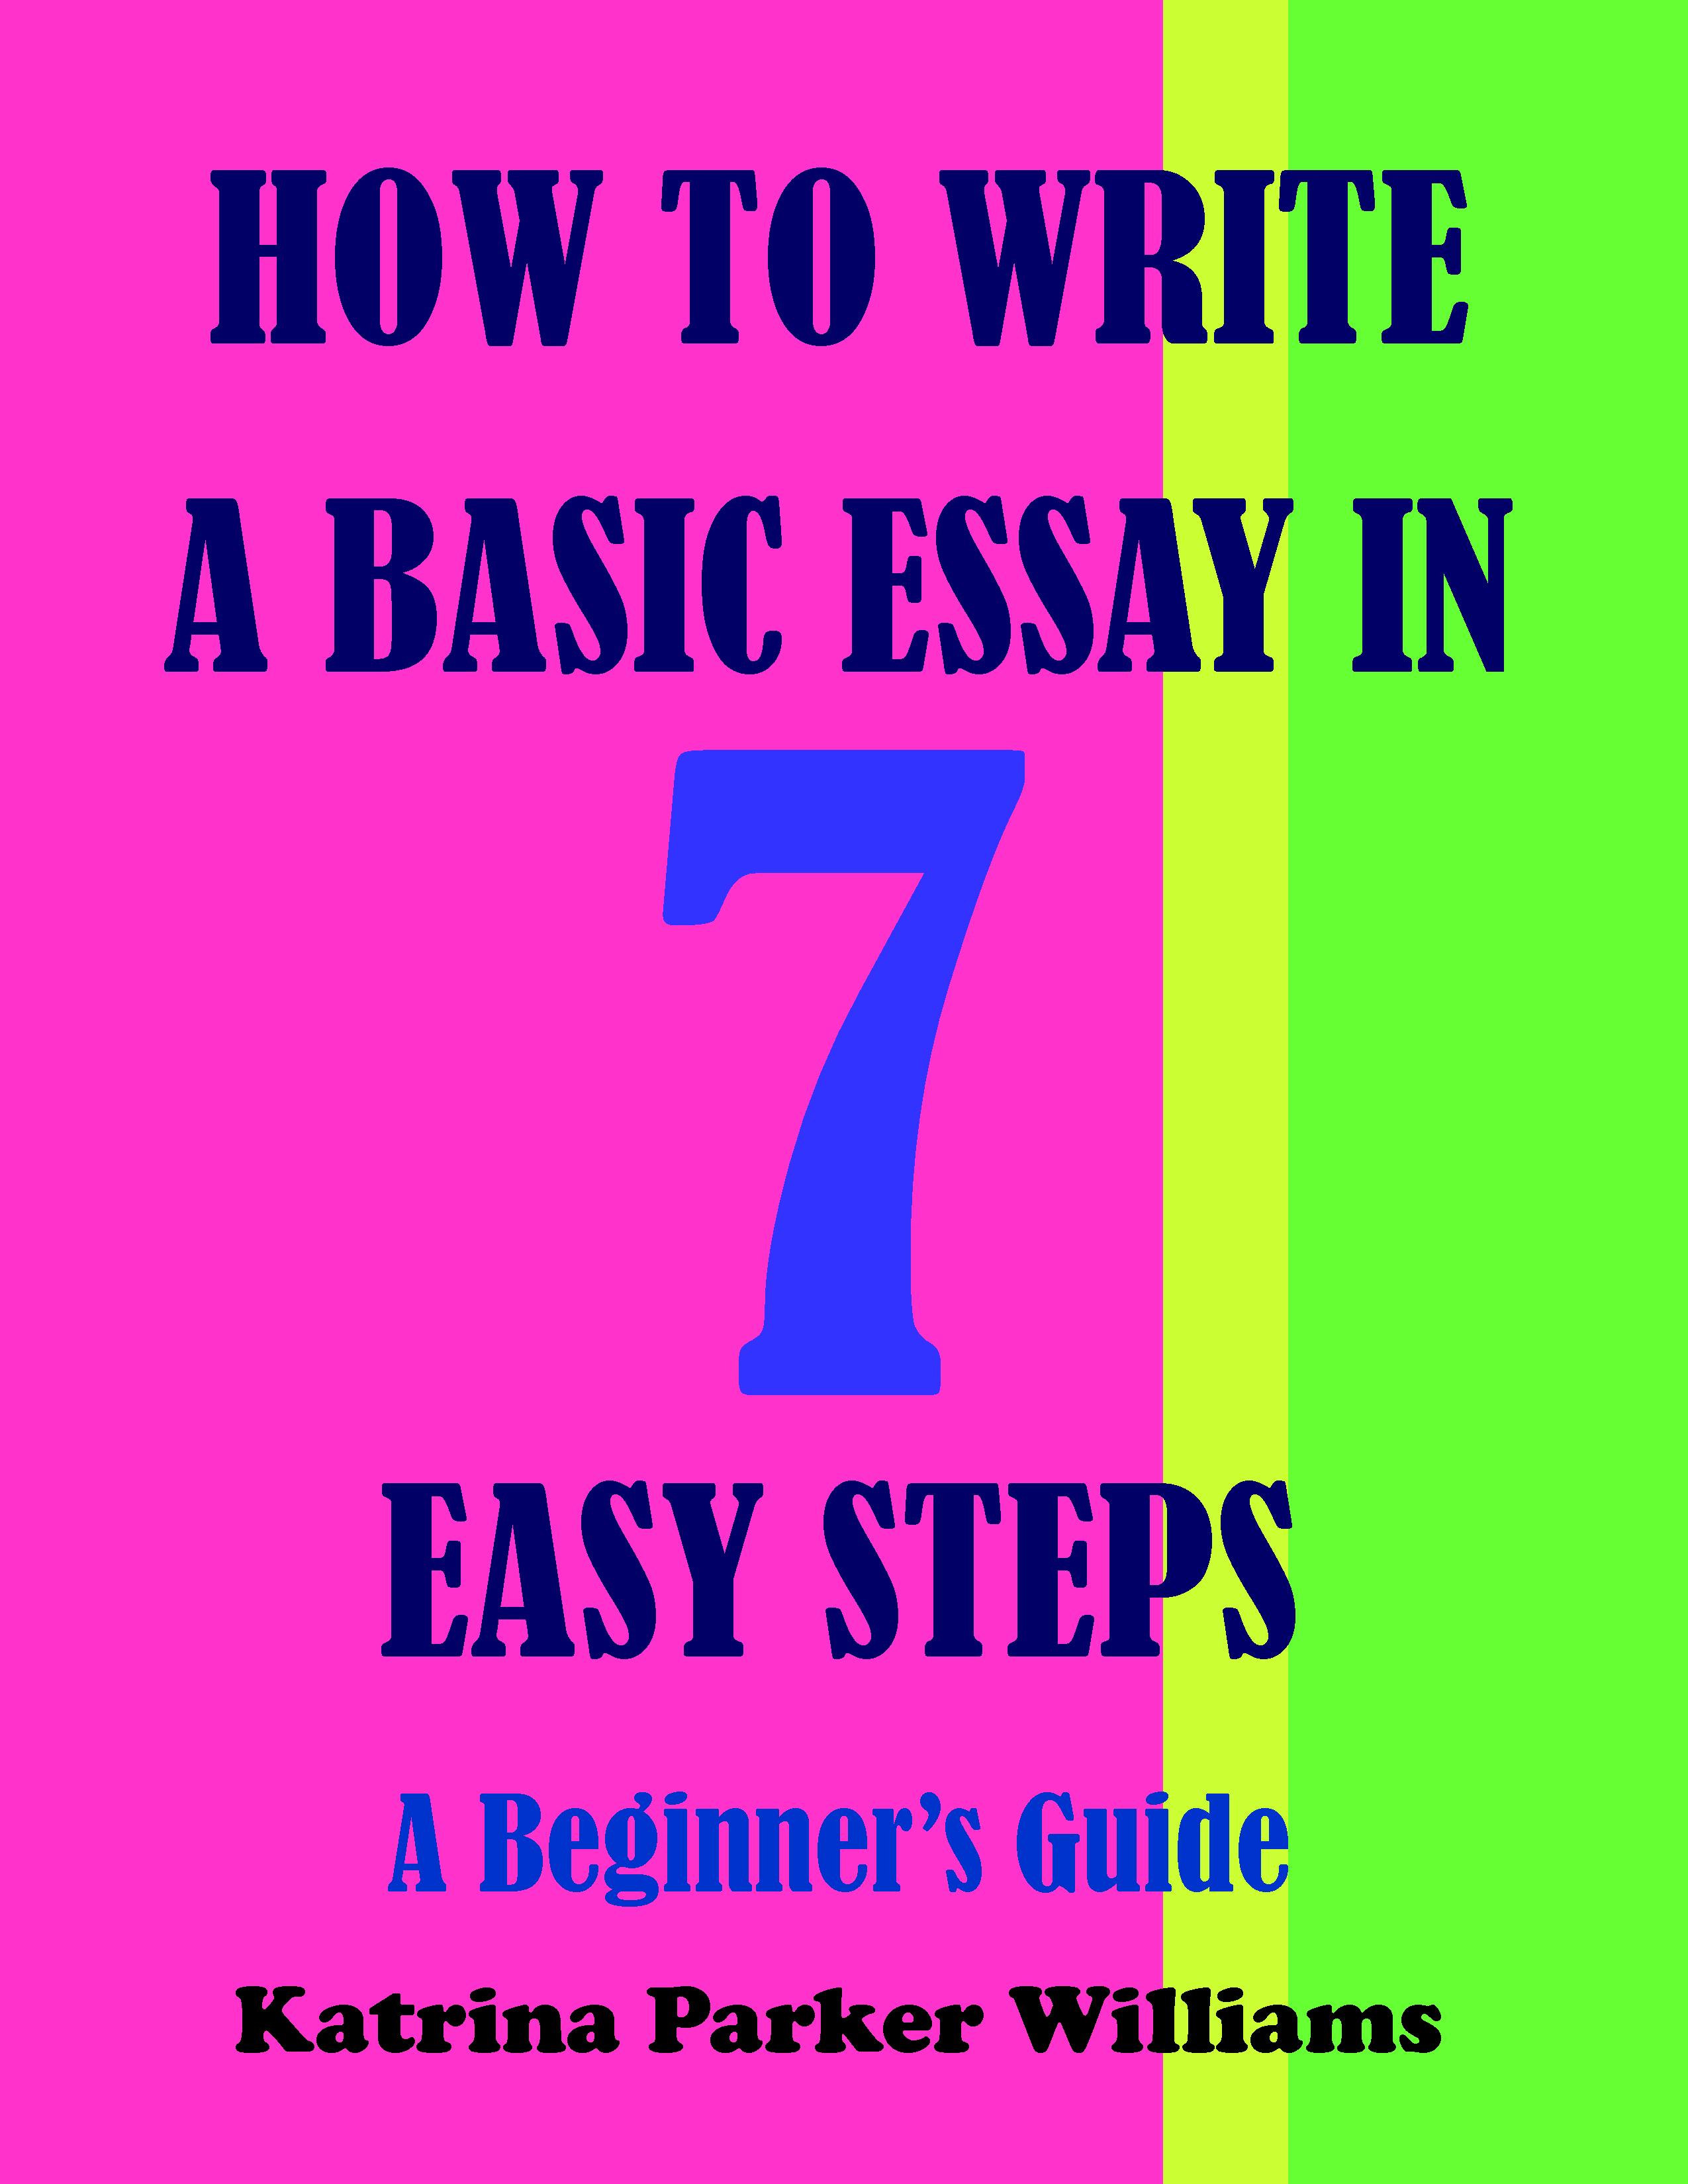 bryant How we can write essay in english | 